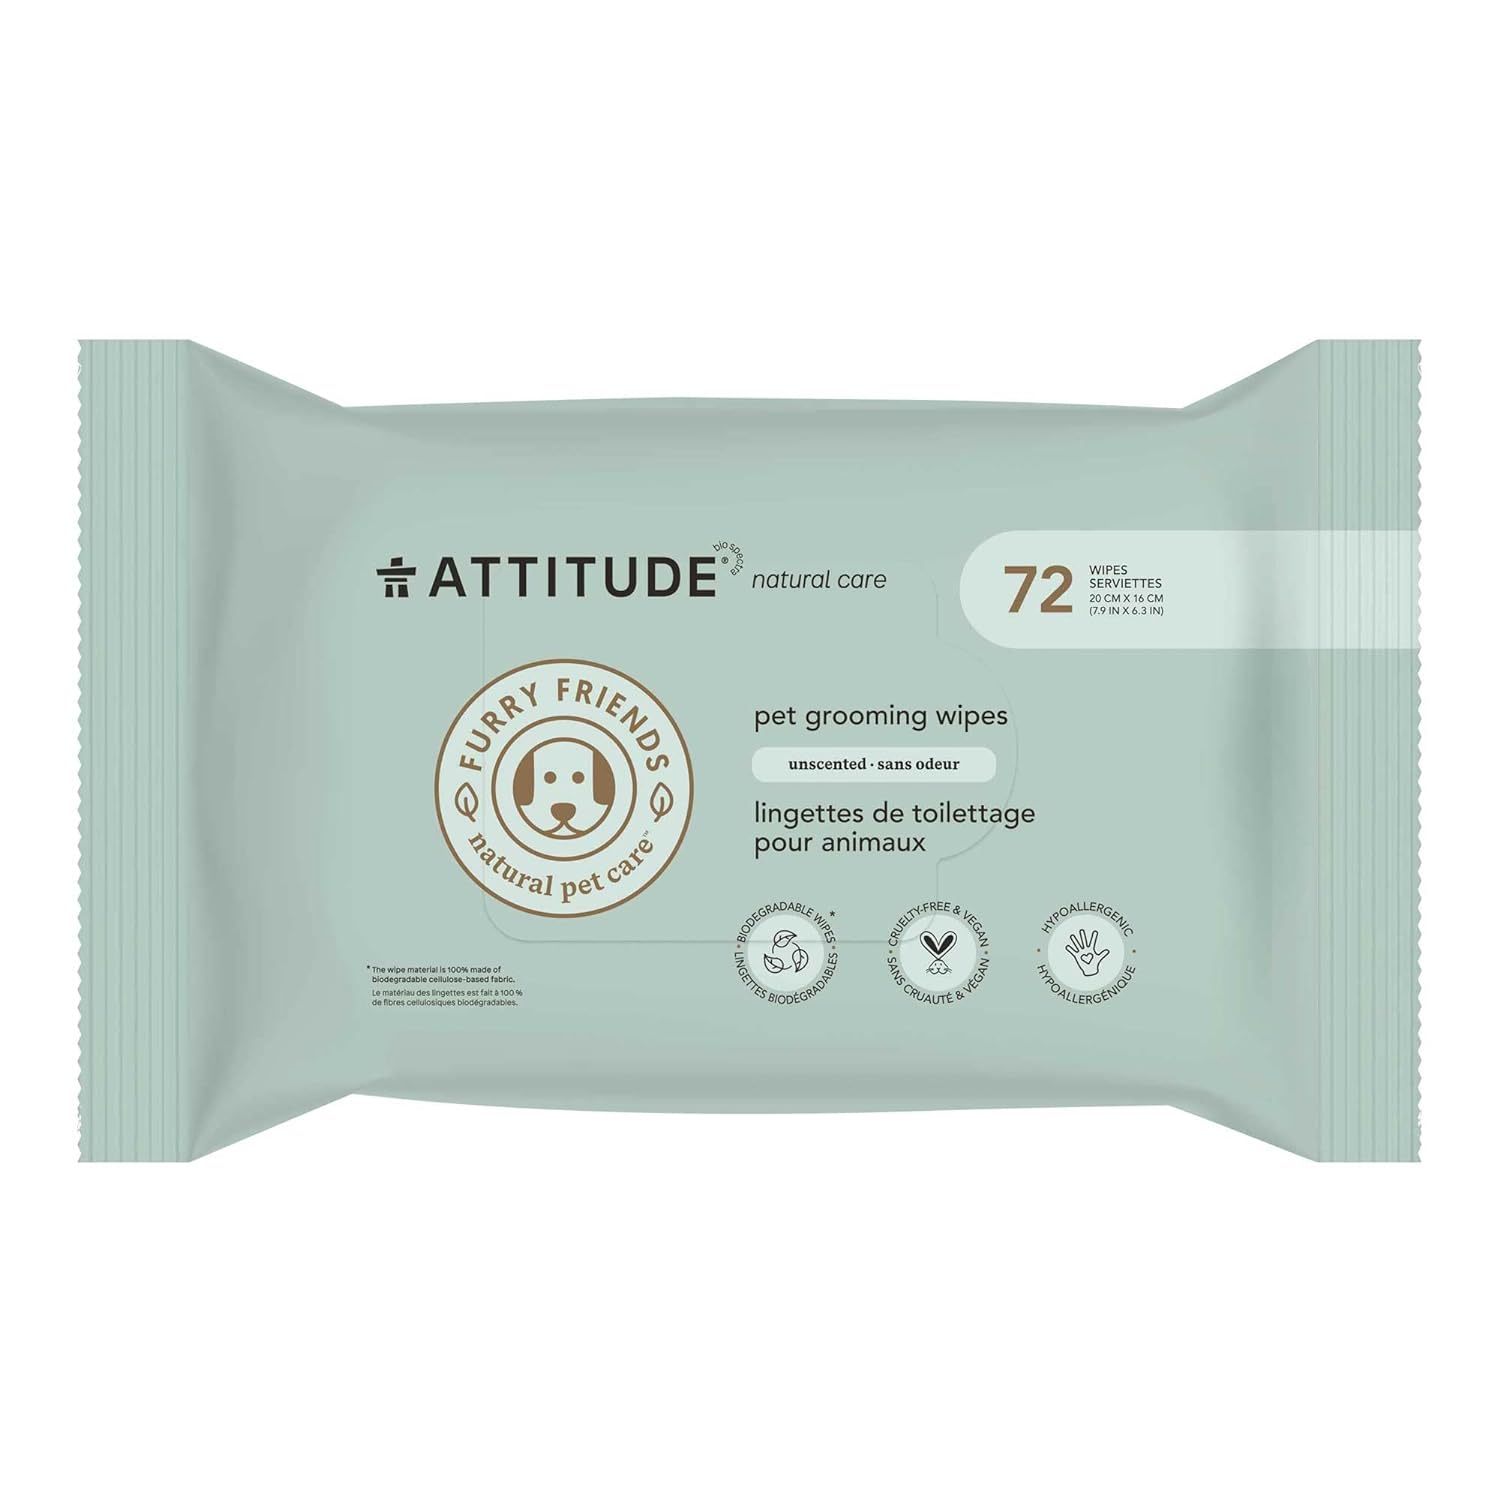 ATTITUDE Pet Grooming Wipes, Hypoallergenic Plant and Mineral-Based Ingredients, Vegan and Cruelty-Free Biodegradable Products, Unscented, 72 count